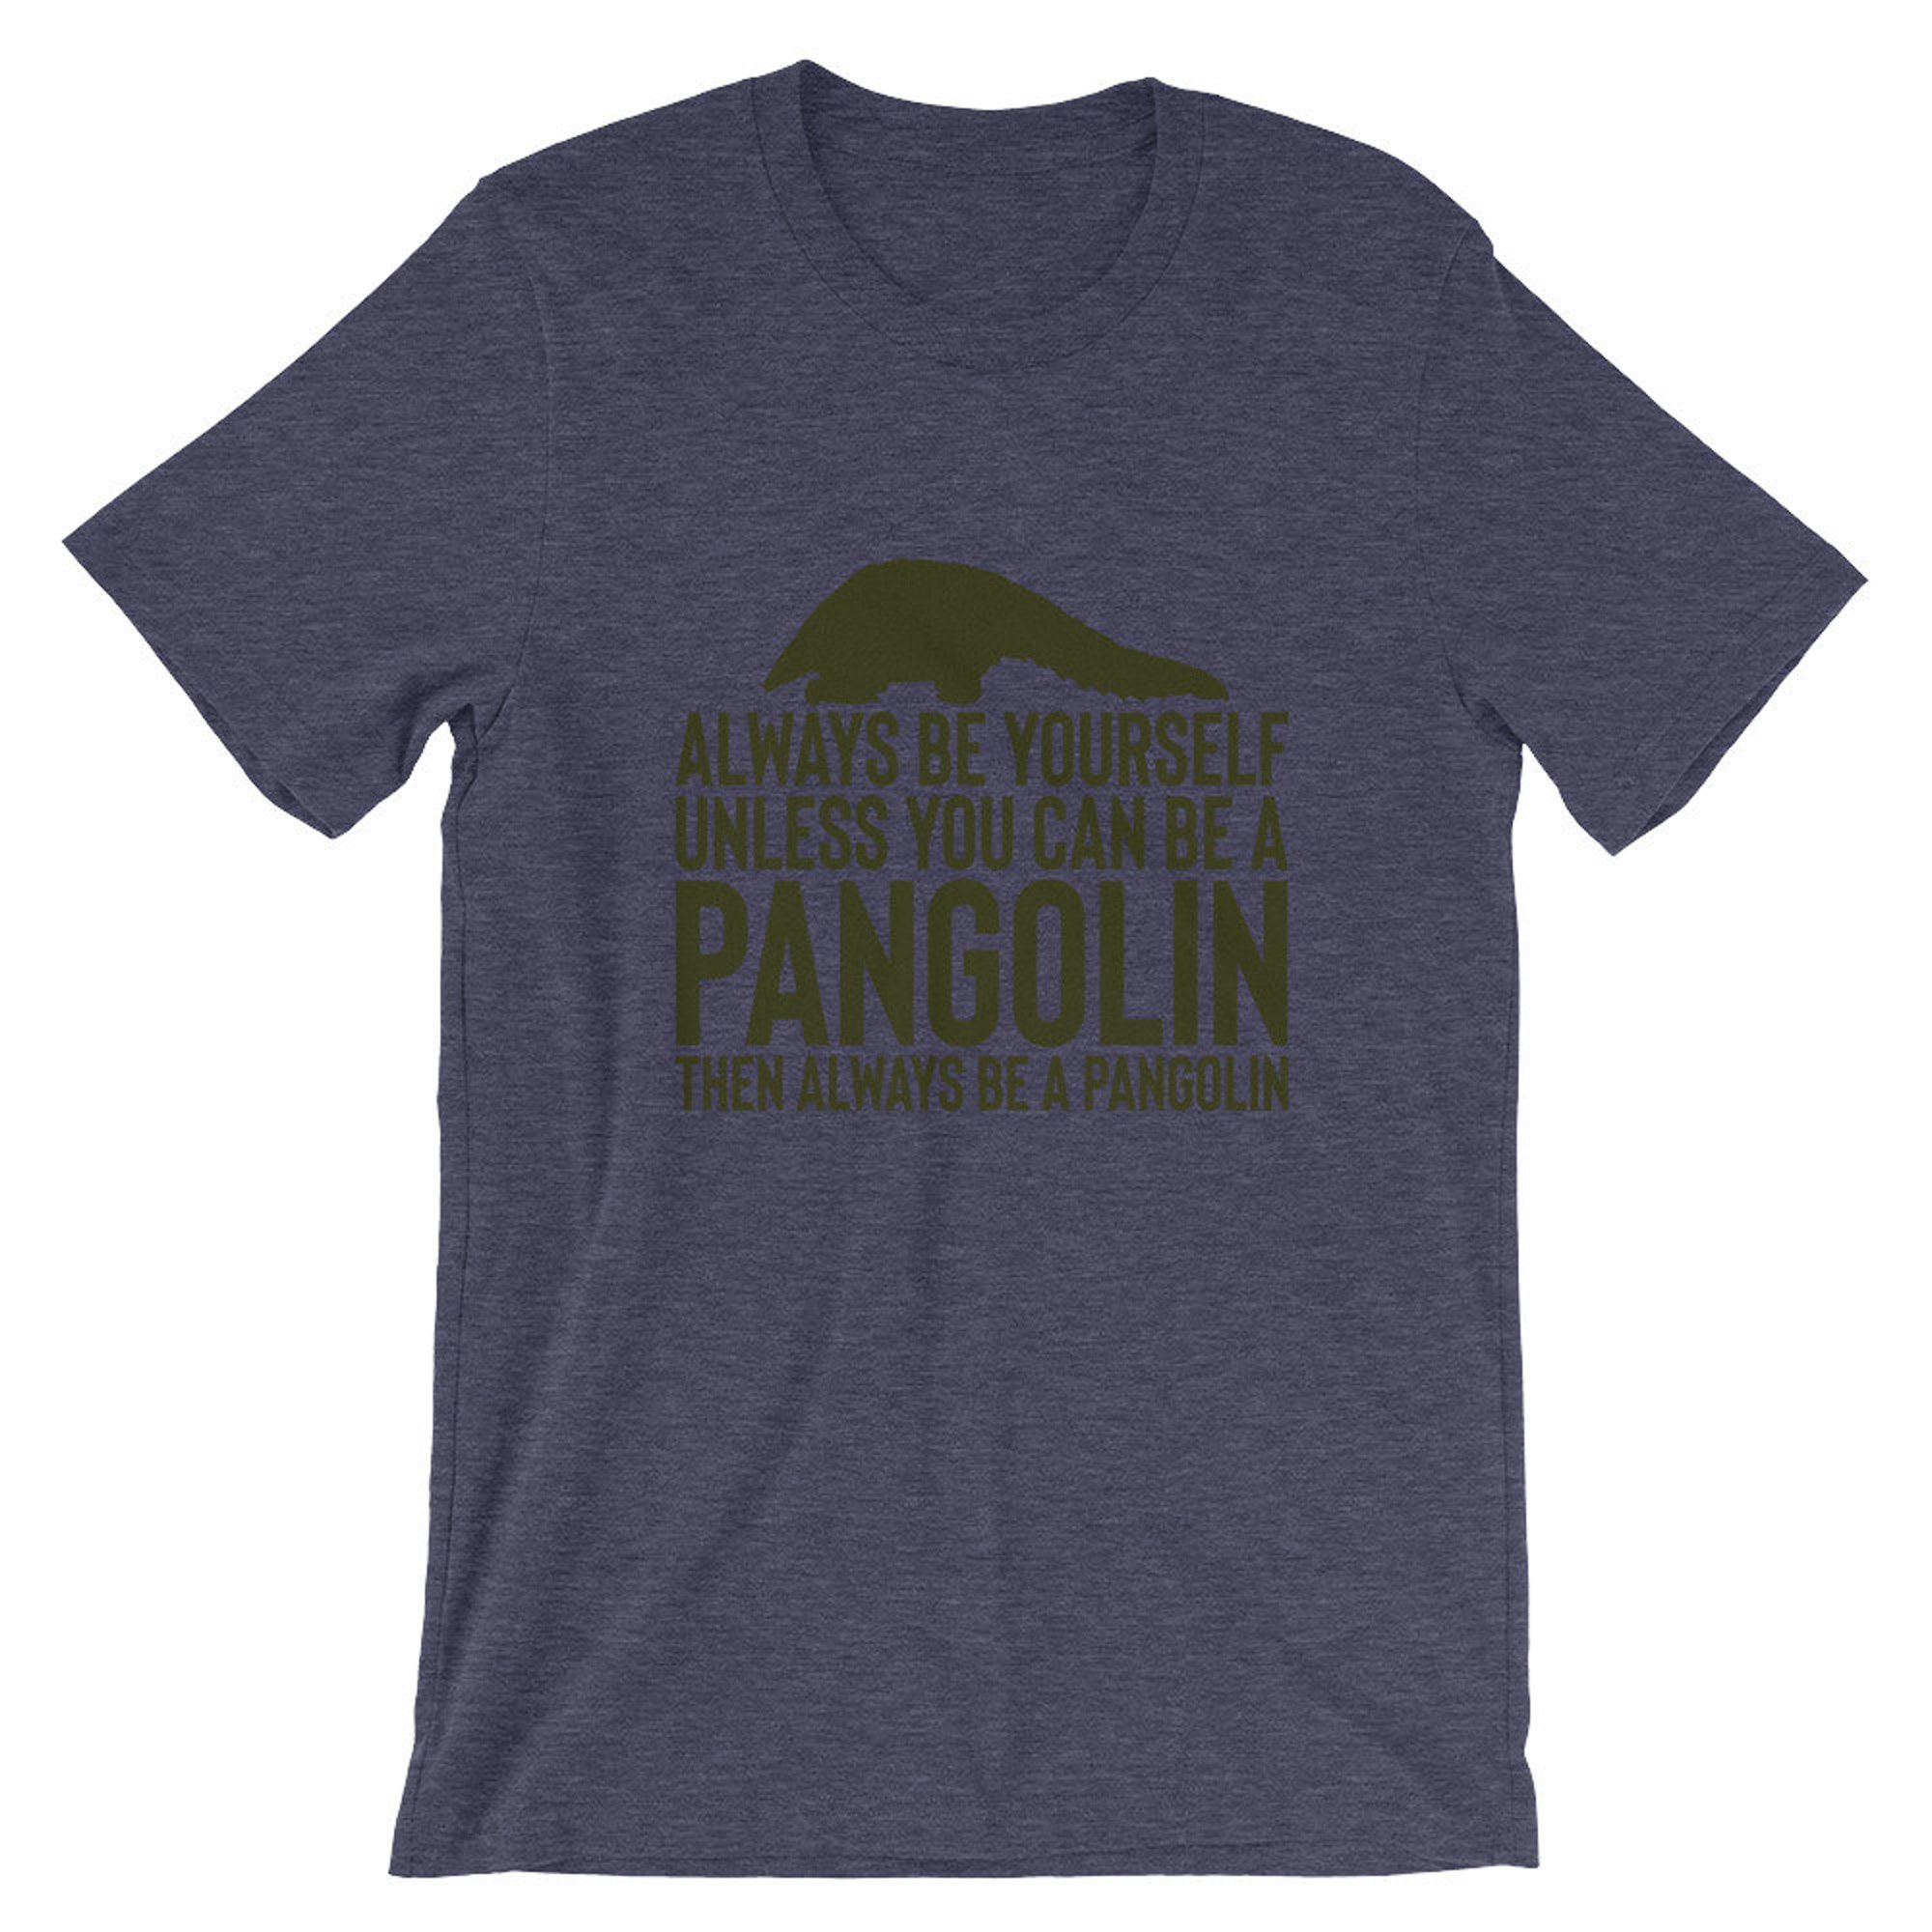 Discover Always Be Yourself Unless You Can Be A Pangolin, Then Always Be A Pangolin T-Shirt | Pangolin Endangered Species Shirt